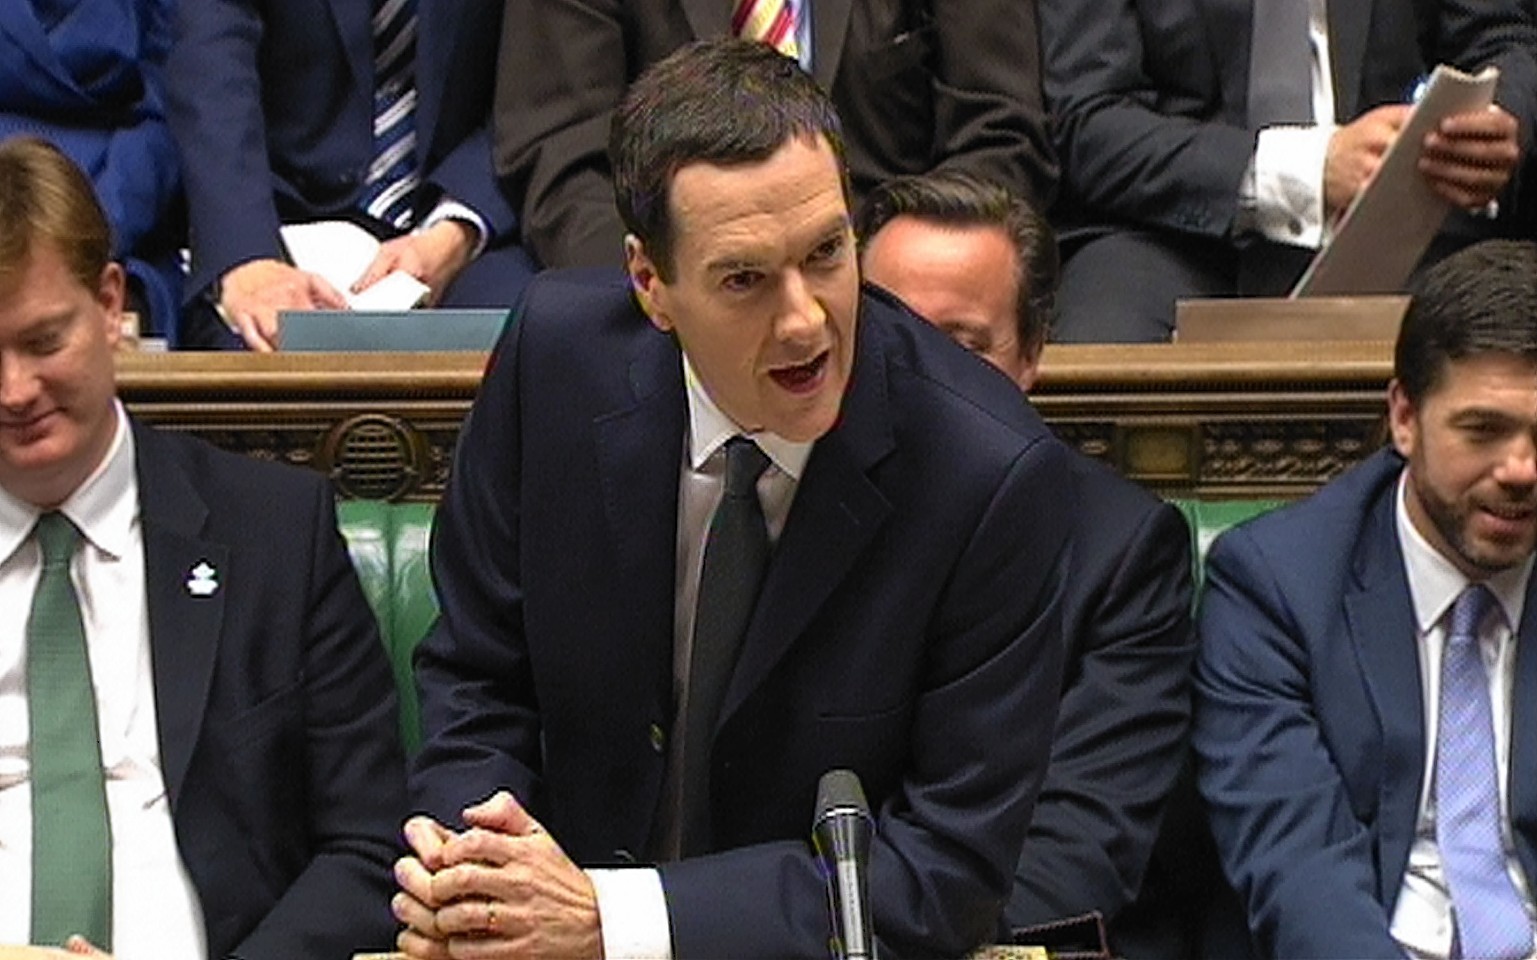 George Osborne told the House of Commons he will cut North Sea oil and gas taxes.